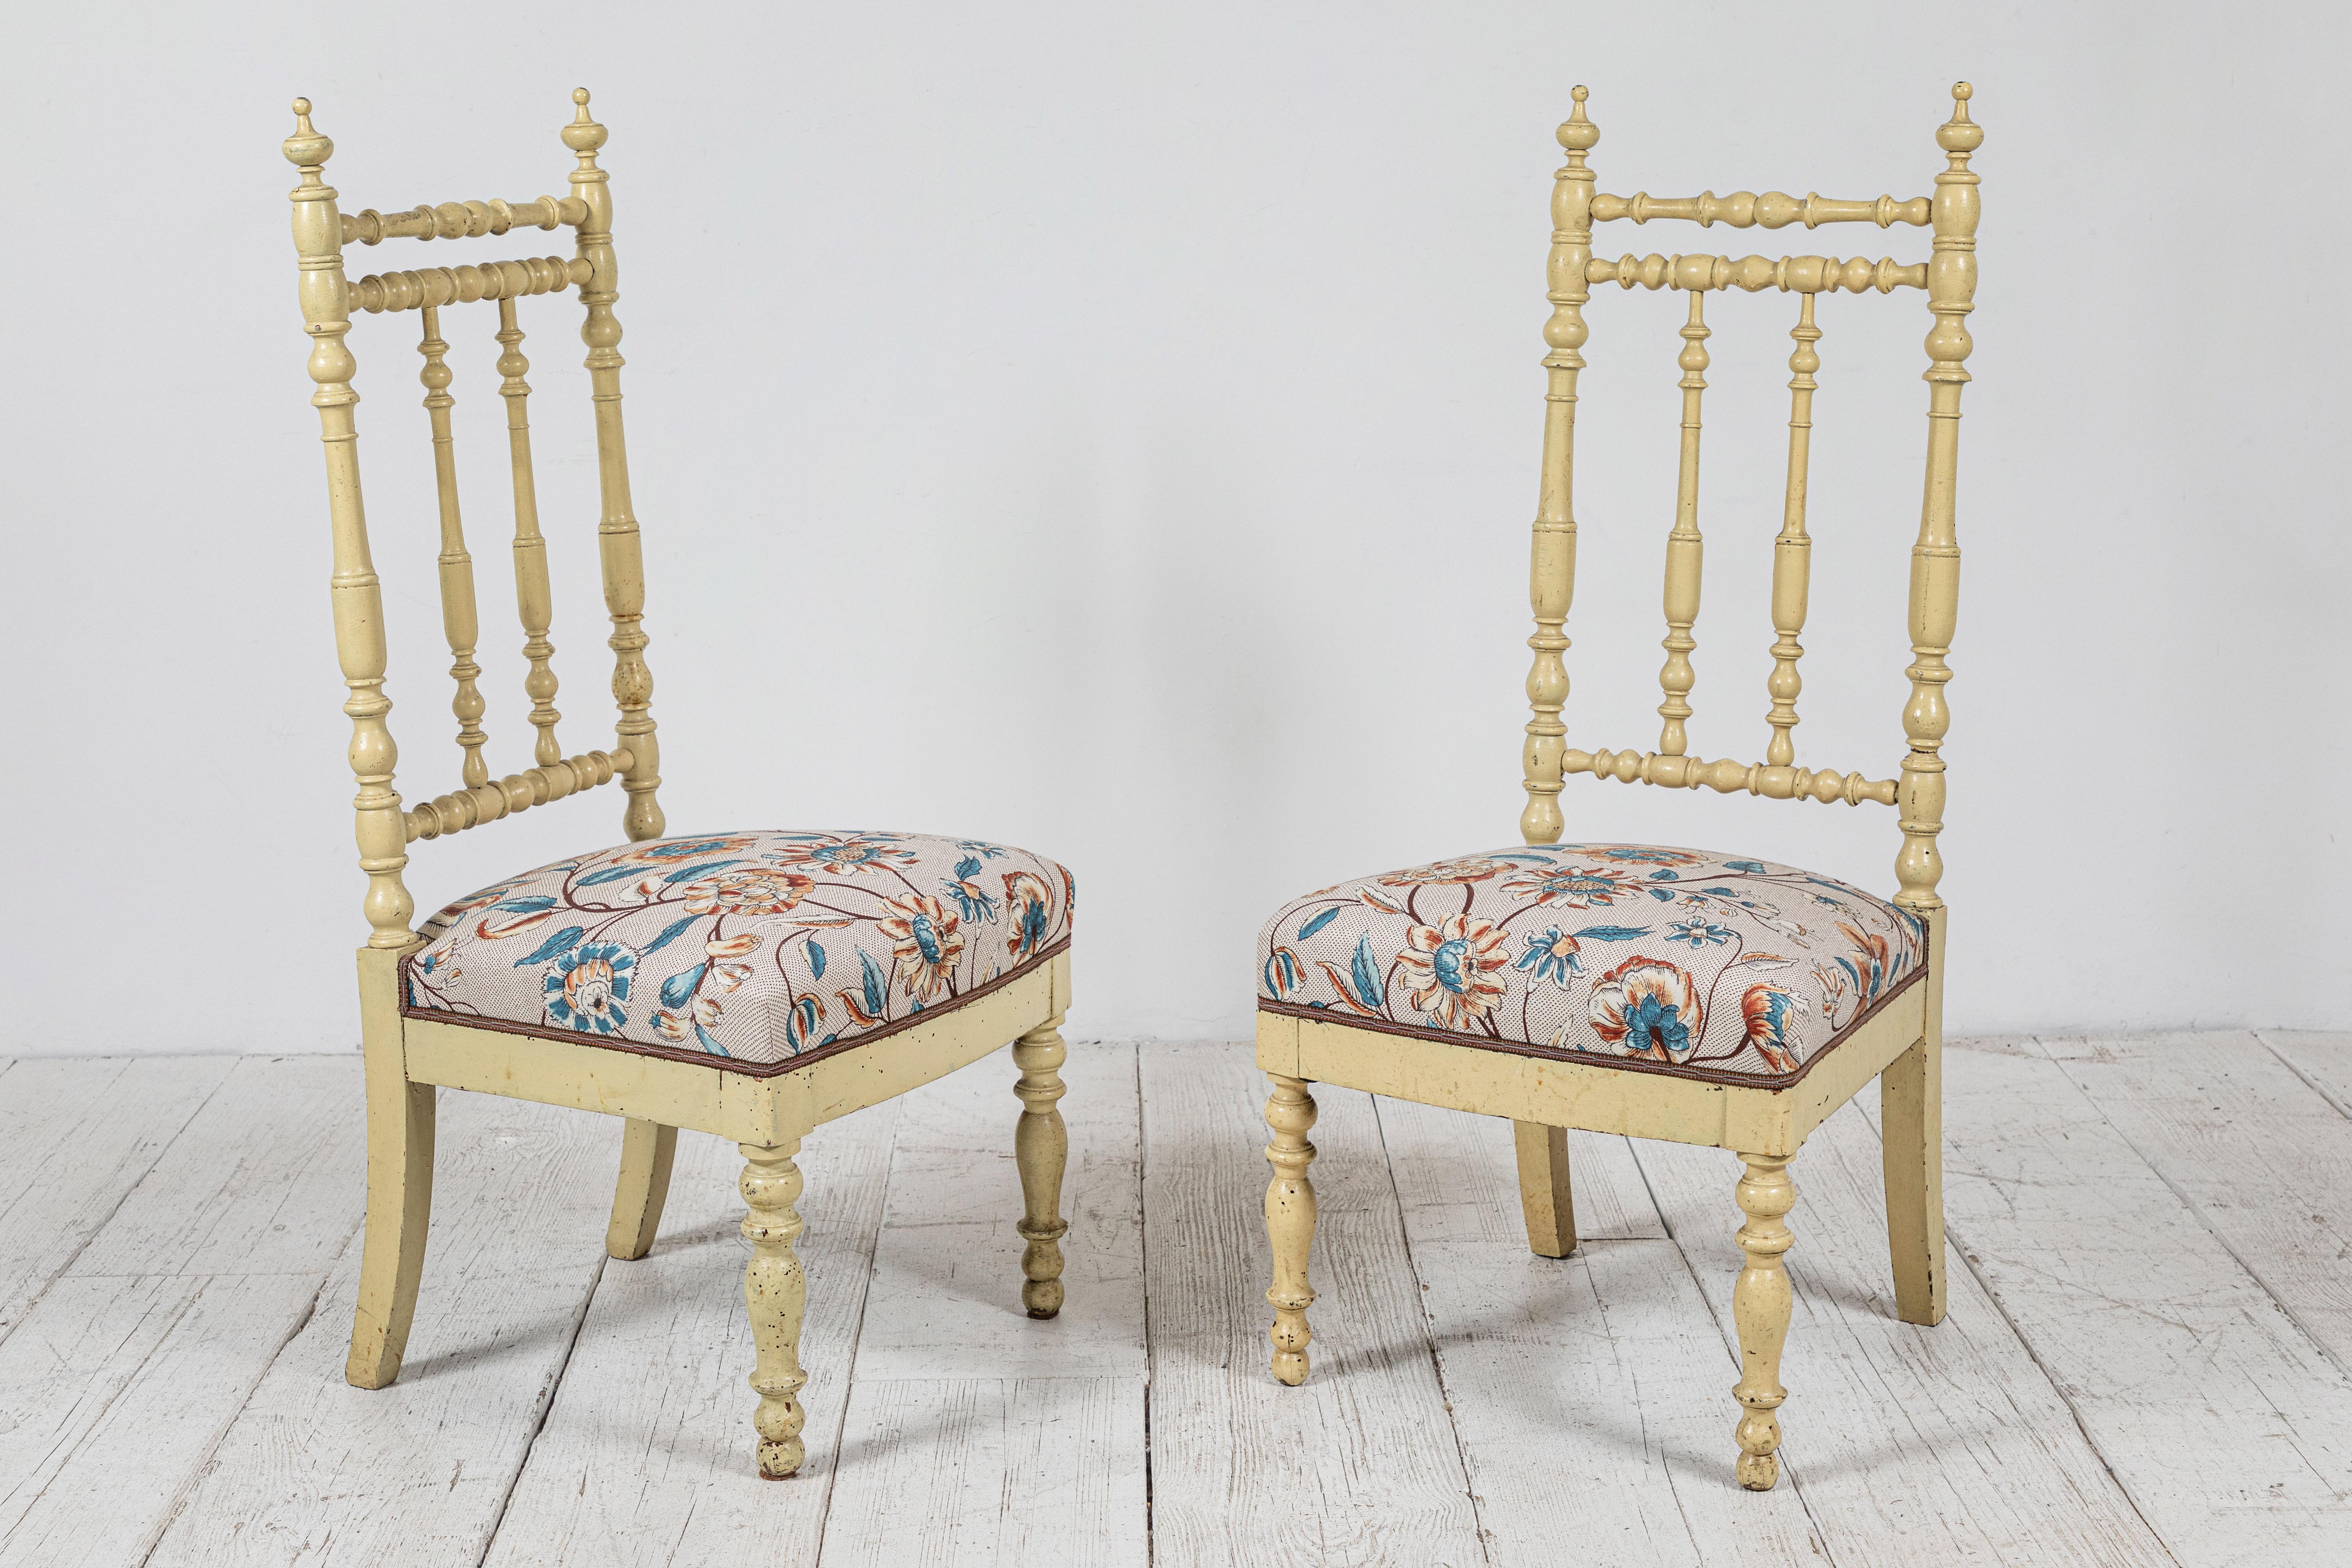 Pair of beautiful French spindle chairs with original cream colored painted frame. Seat cushions newly upholstered in Claremont floral linen with vintage tape trim.